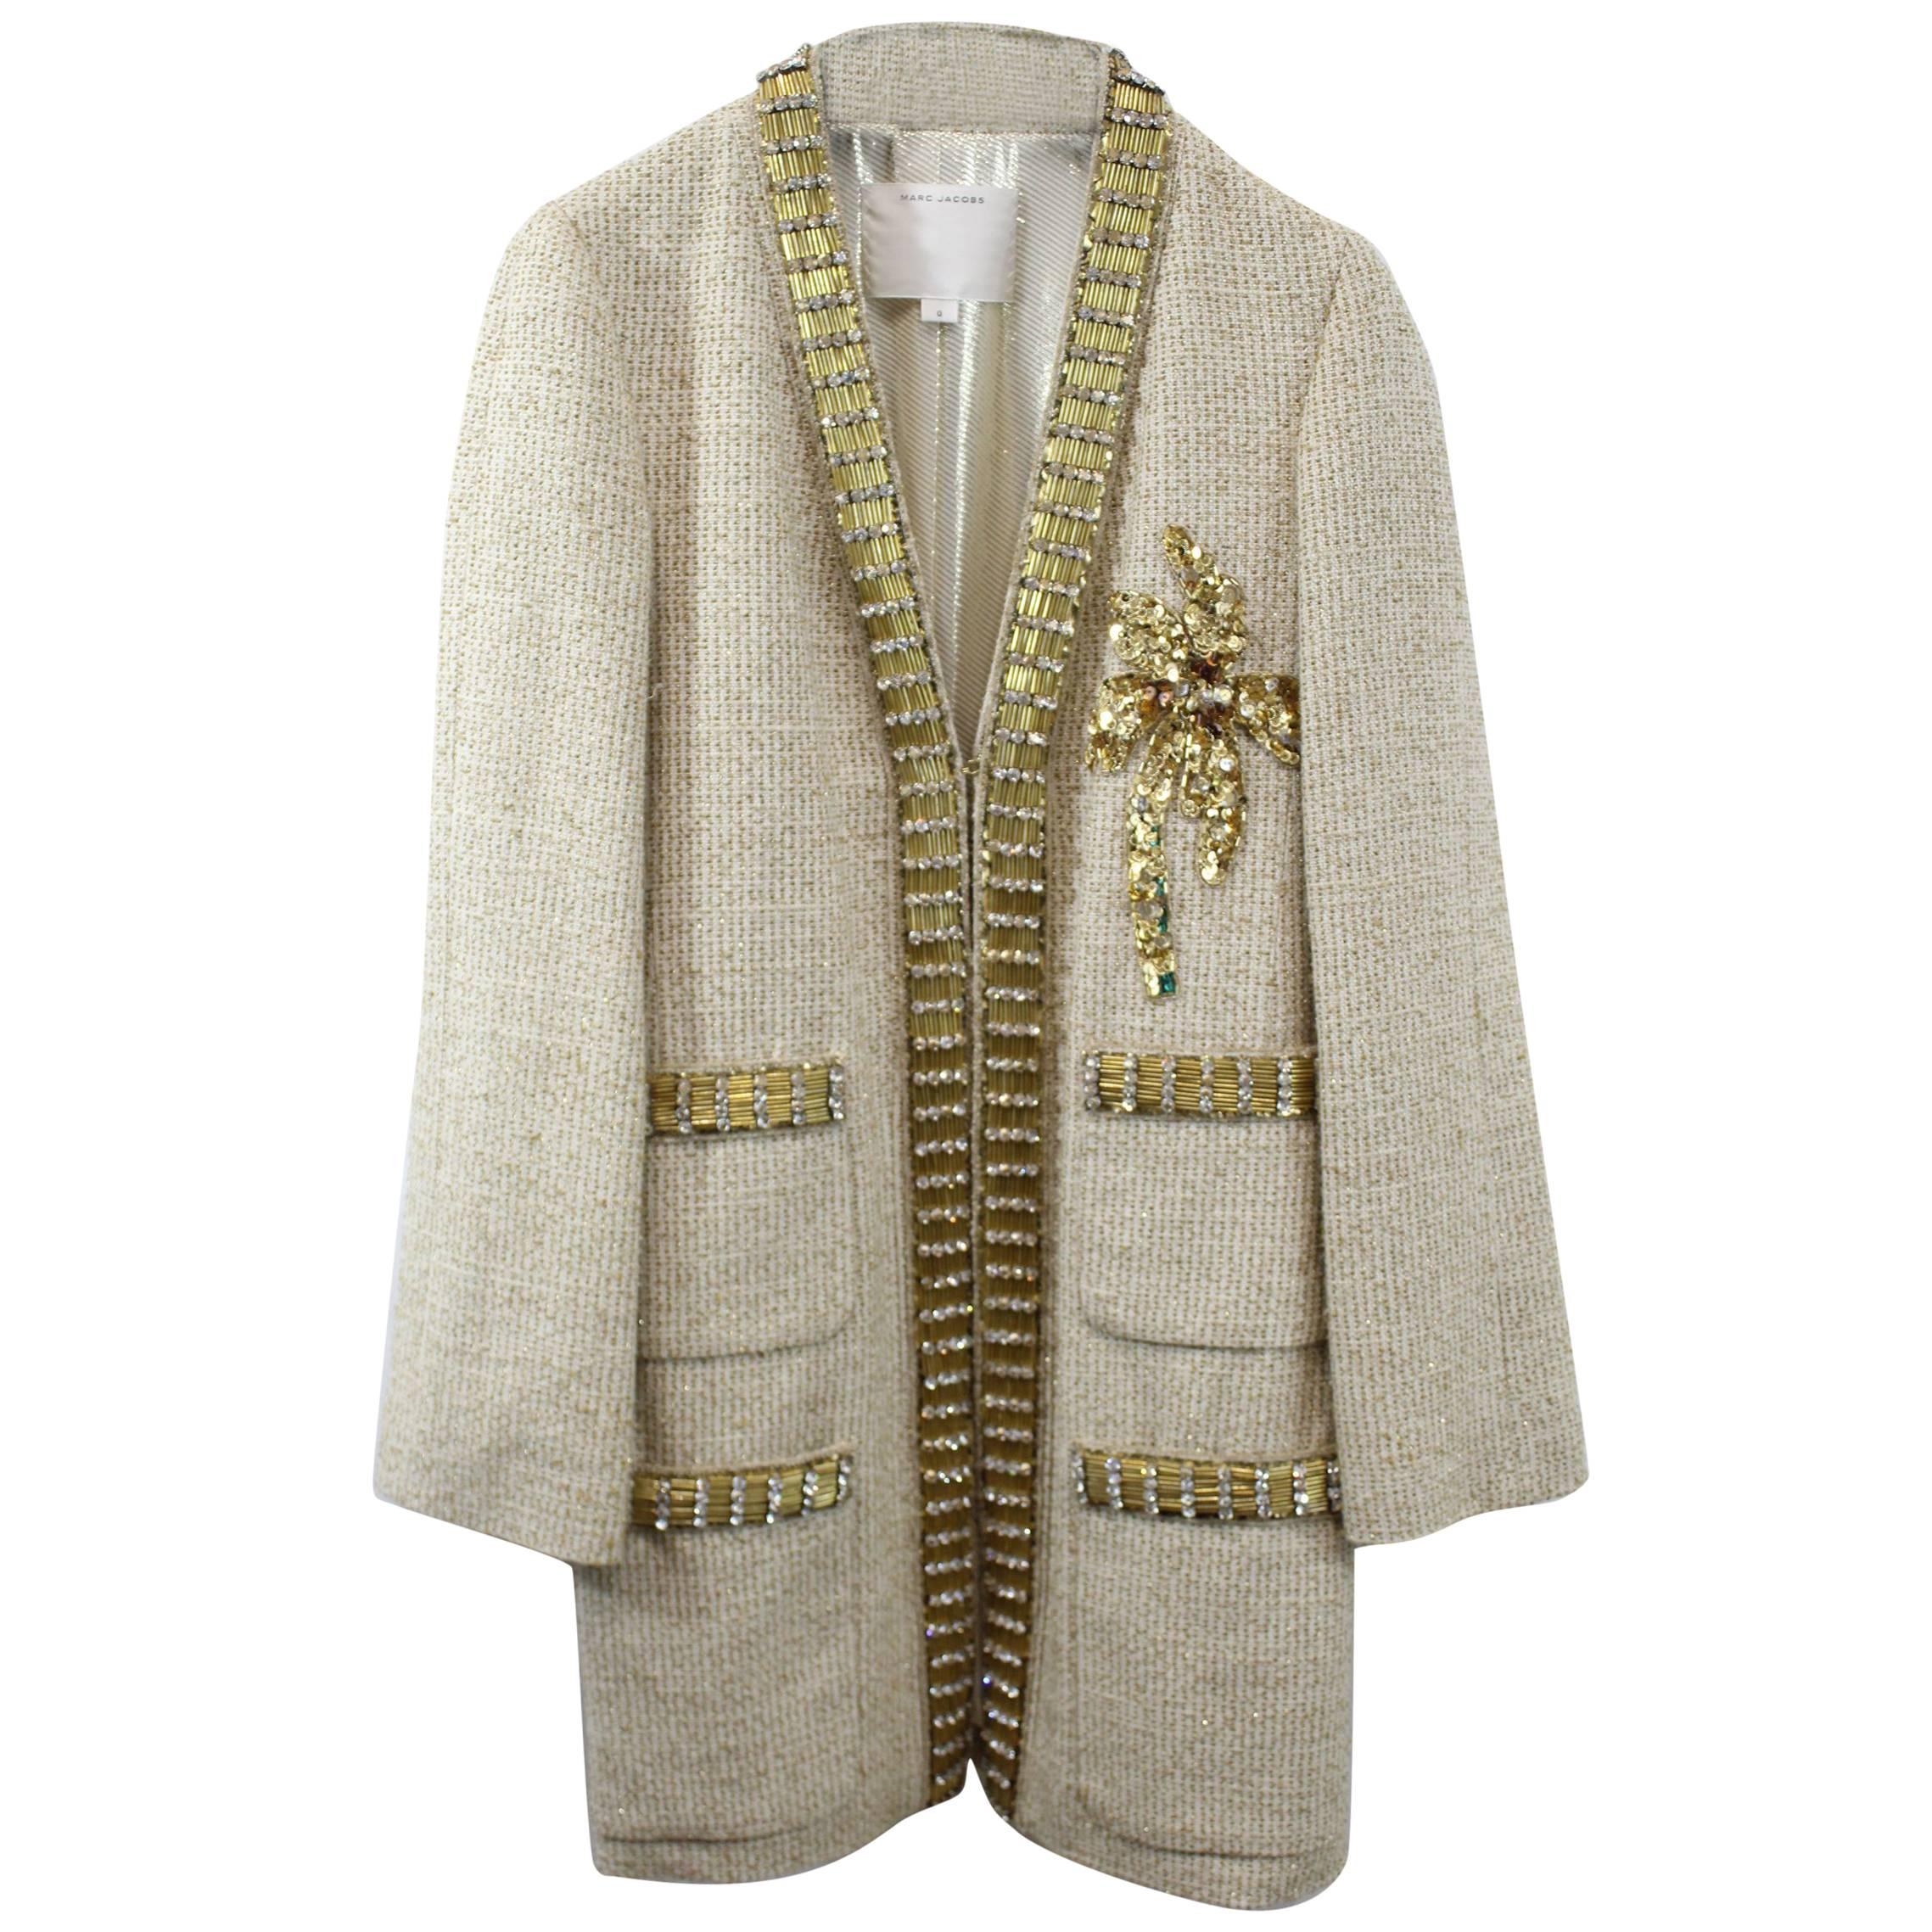 Marc Jacobs Golden Jacket with amazing broosery work. Size US 0